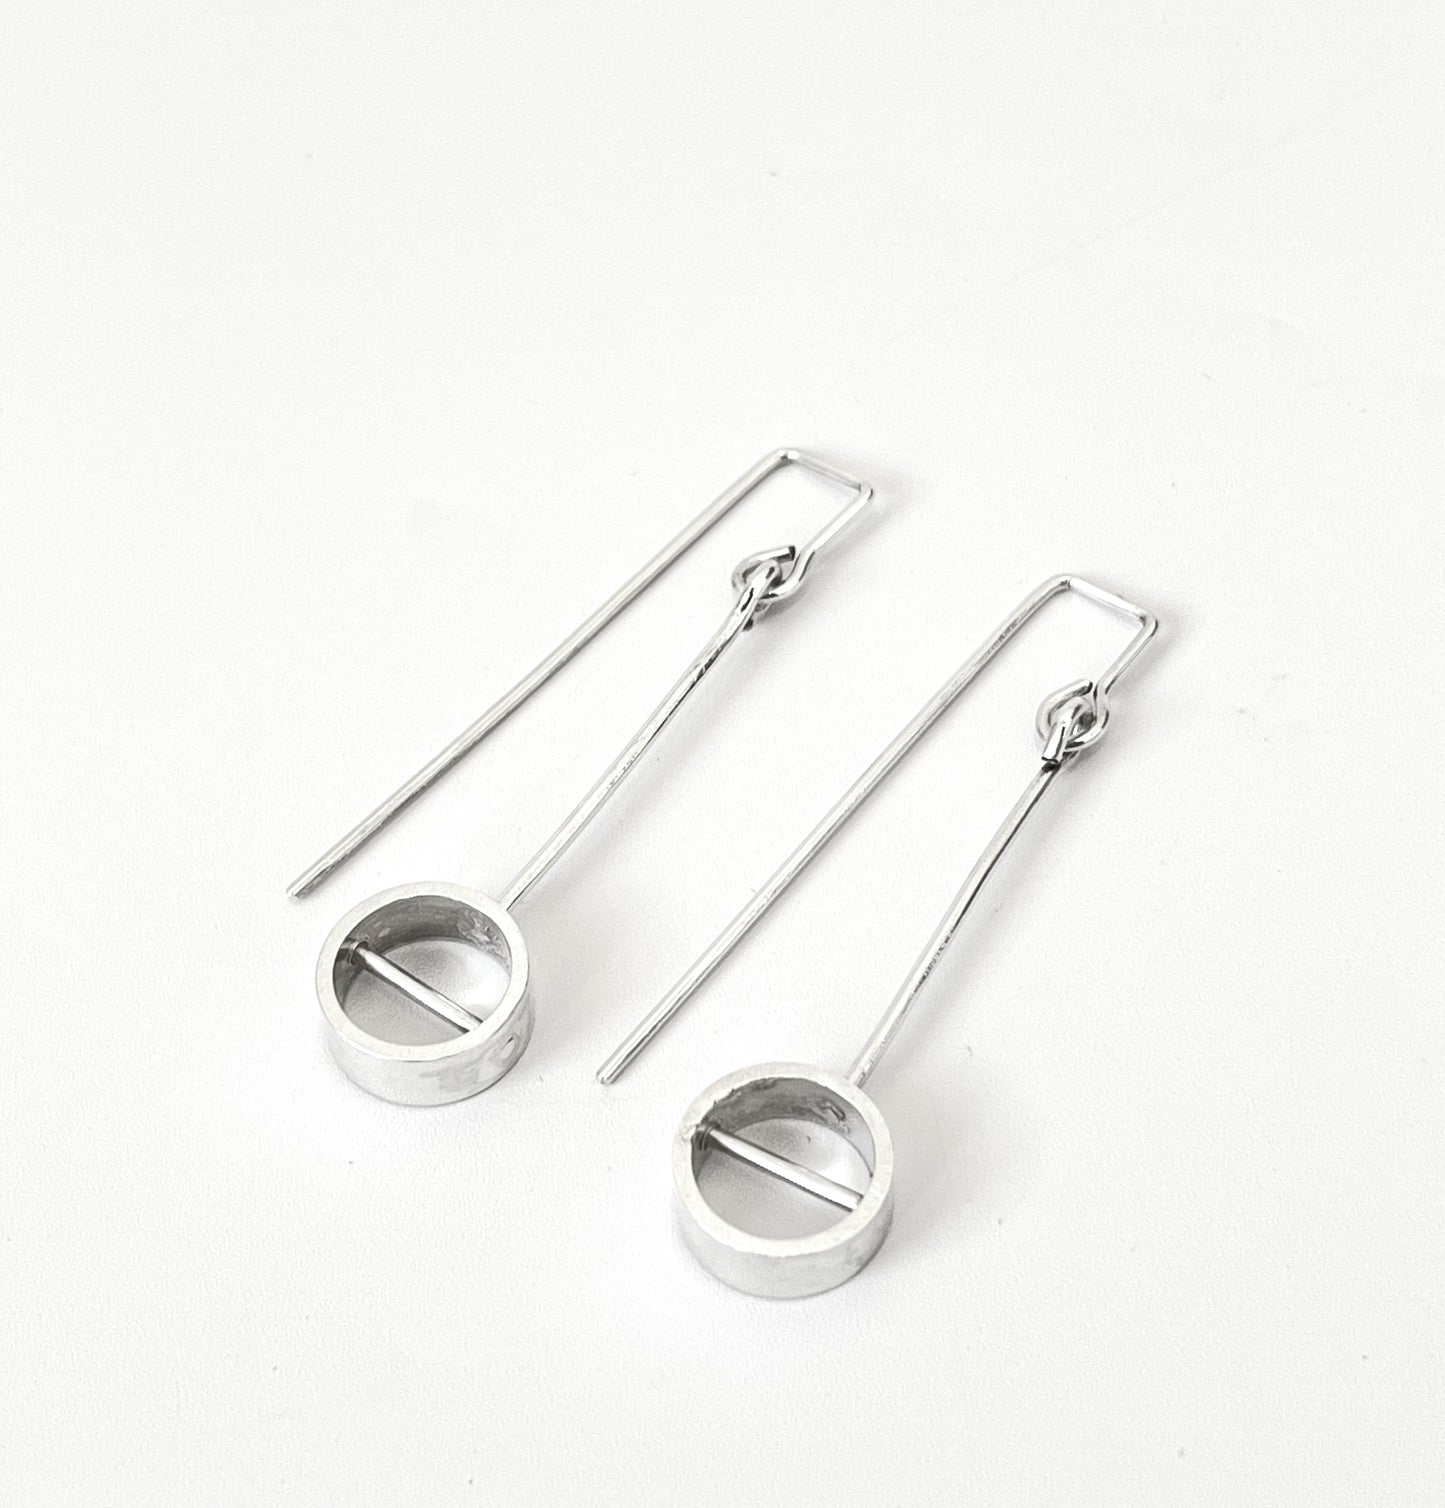 Small Silver Hoops Earrings with Bar